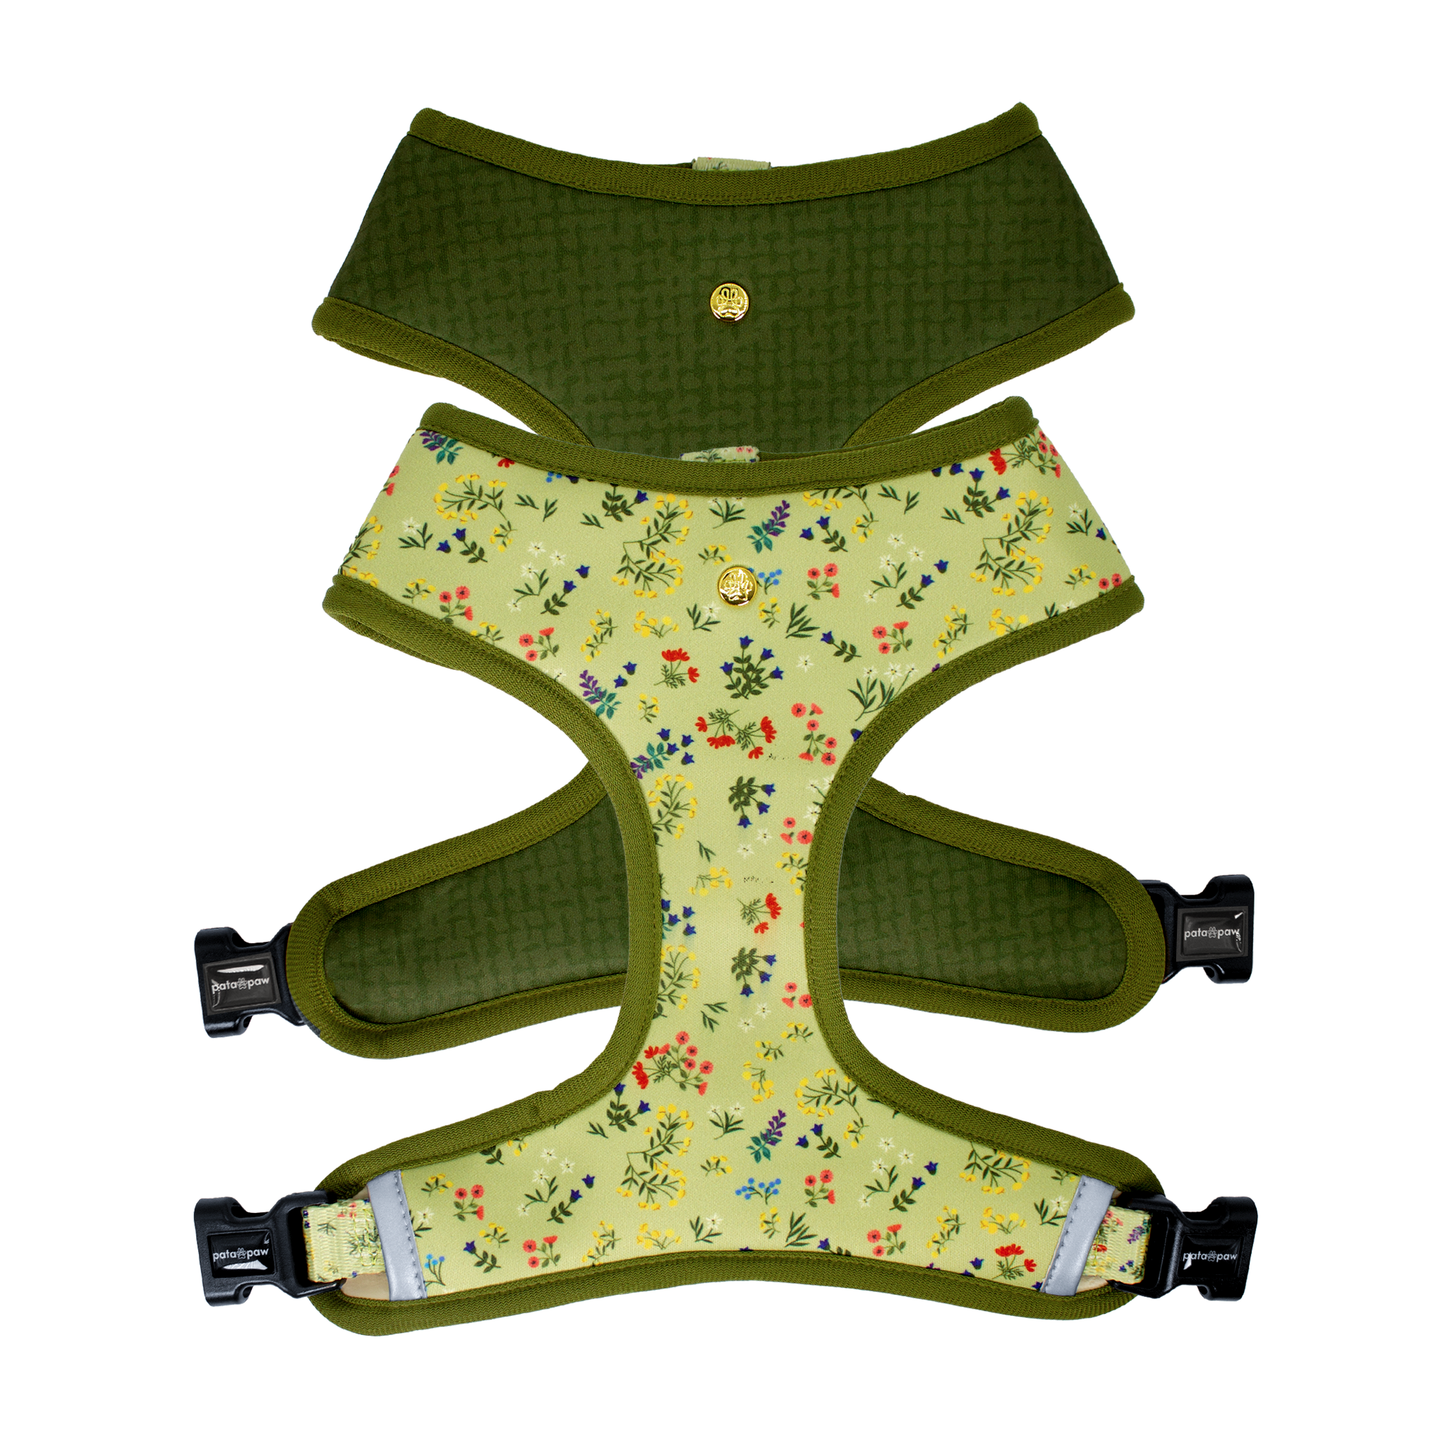 Pata Paw alpine wildflowers reversible harness showing both sides.